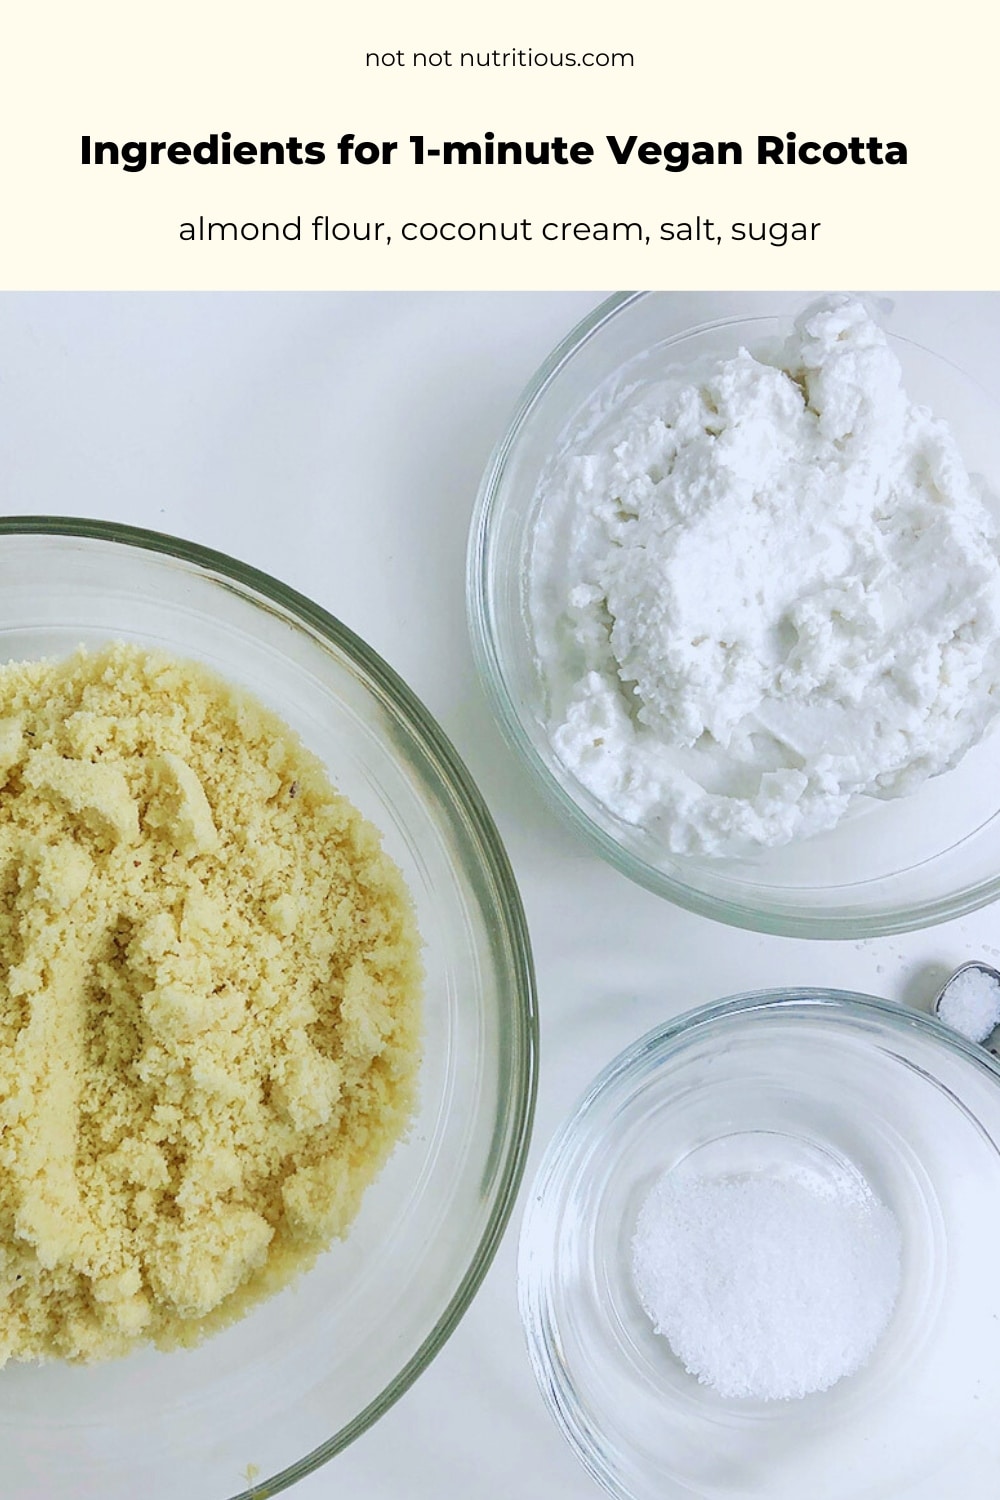 Infographic with ingredients for 1-minute Vegan Ricotta Cheese. Top-down view of almond flour, coconut cream, salt, and sugar, in clear mixing bowls against a white background